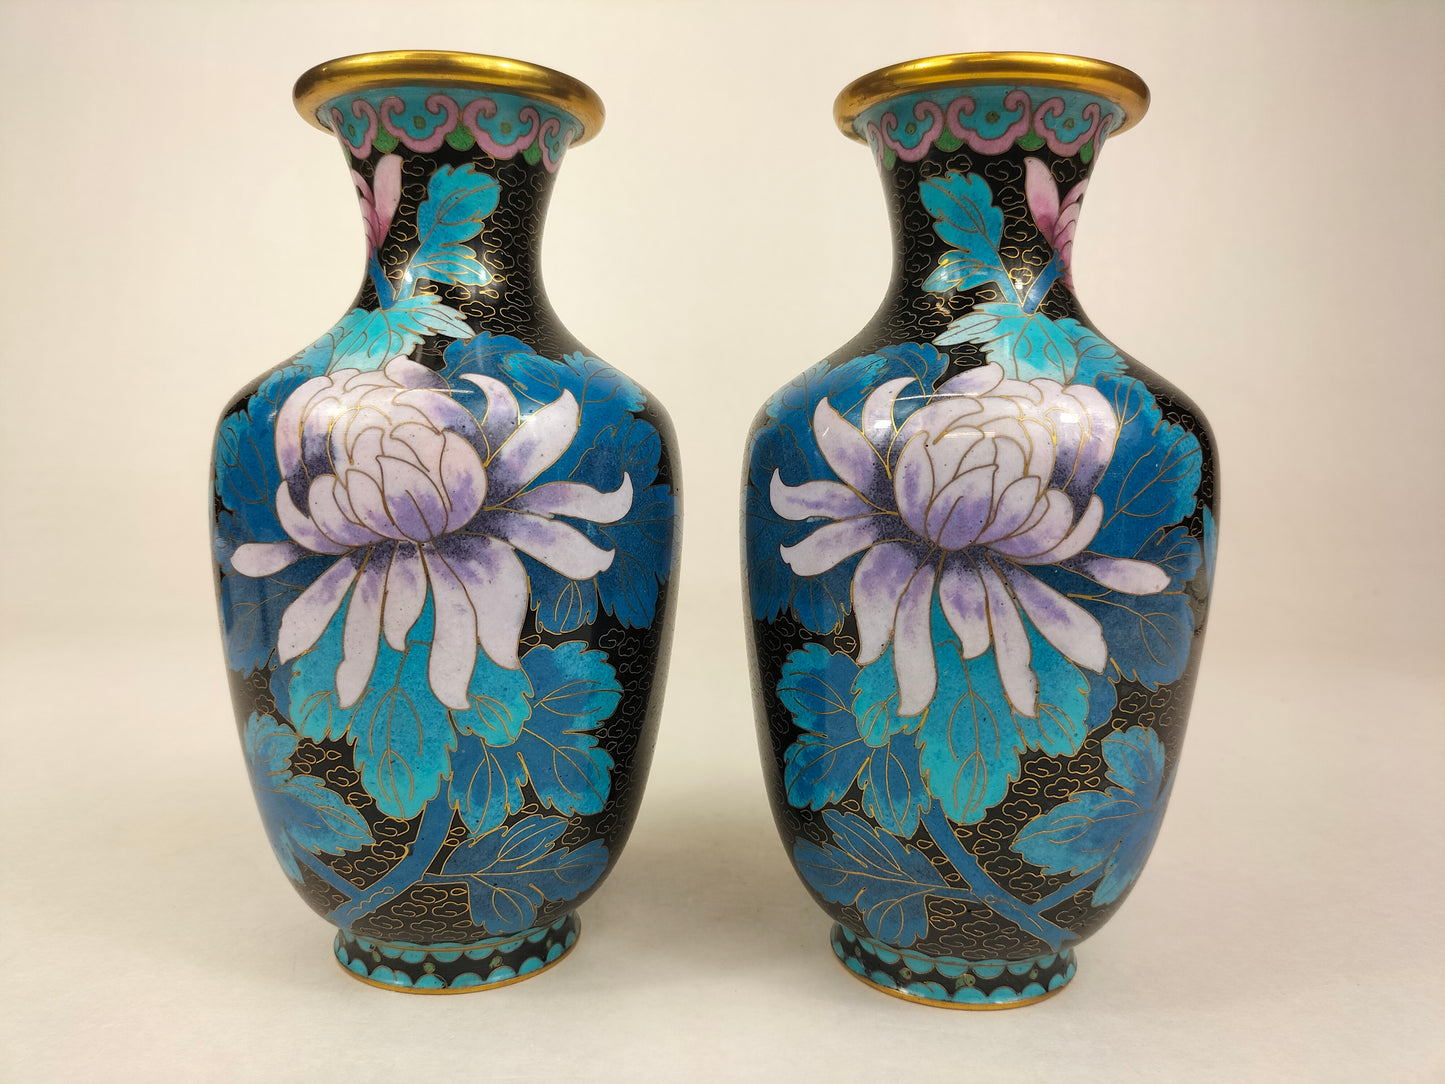 Pair of Chinese cloisonne vases decorated with butterfly and flowers // 20th century